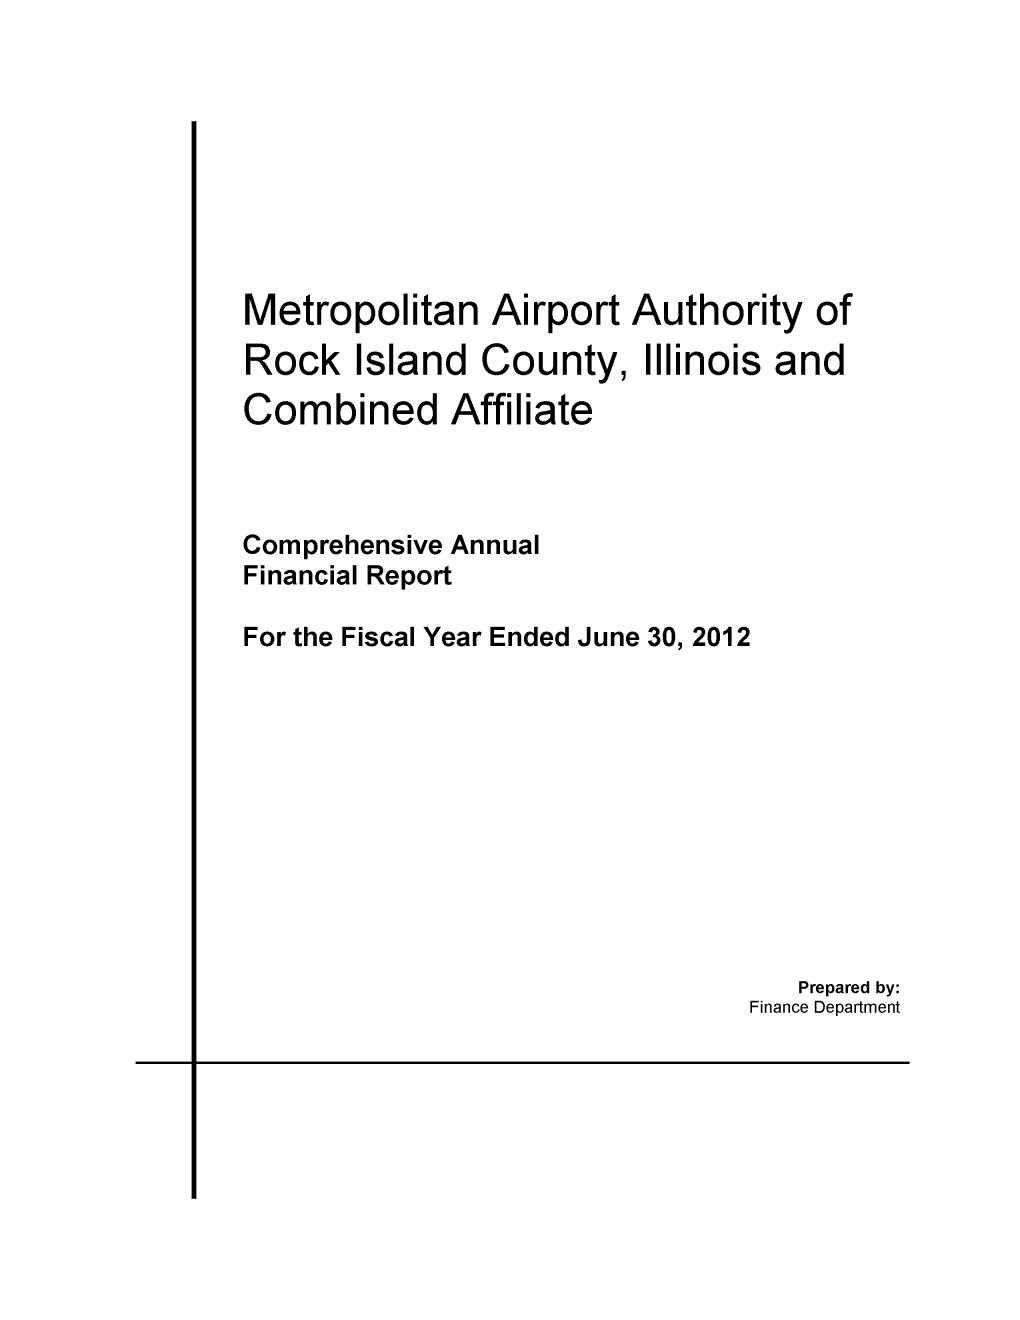 Metropolitan Airport Authority of Rock Island County, Illinois and Combined Affiliate